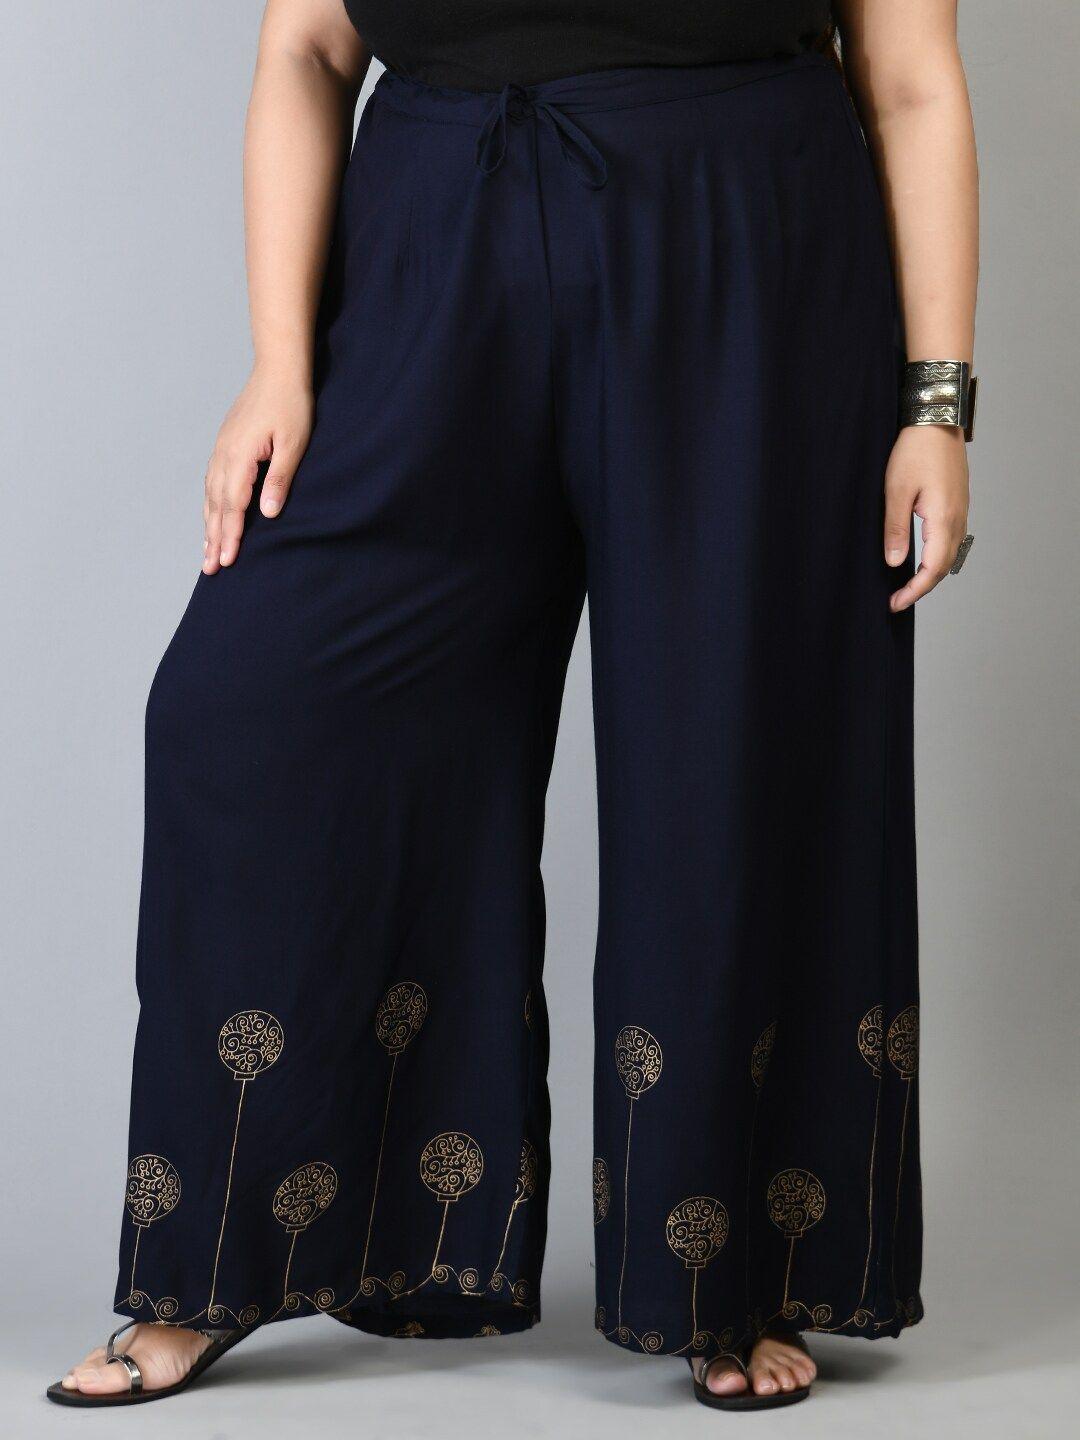 prettyplus by desinoor .com women plus size navy blue & gold-toned floral printed palazzos